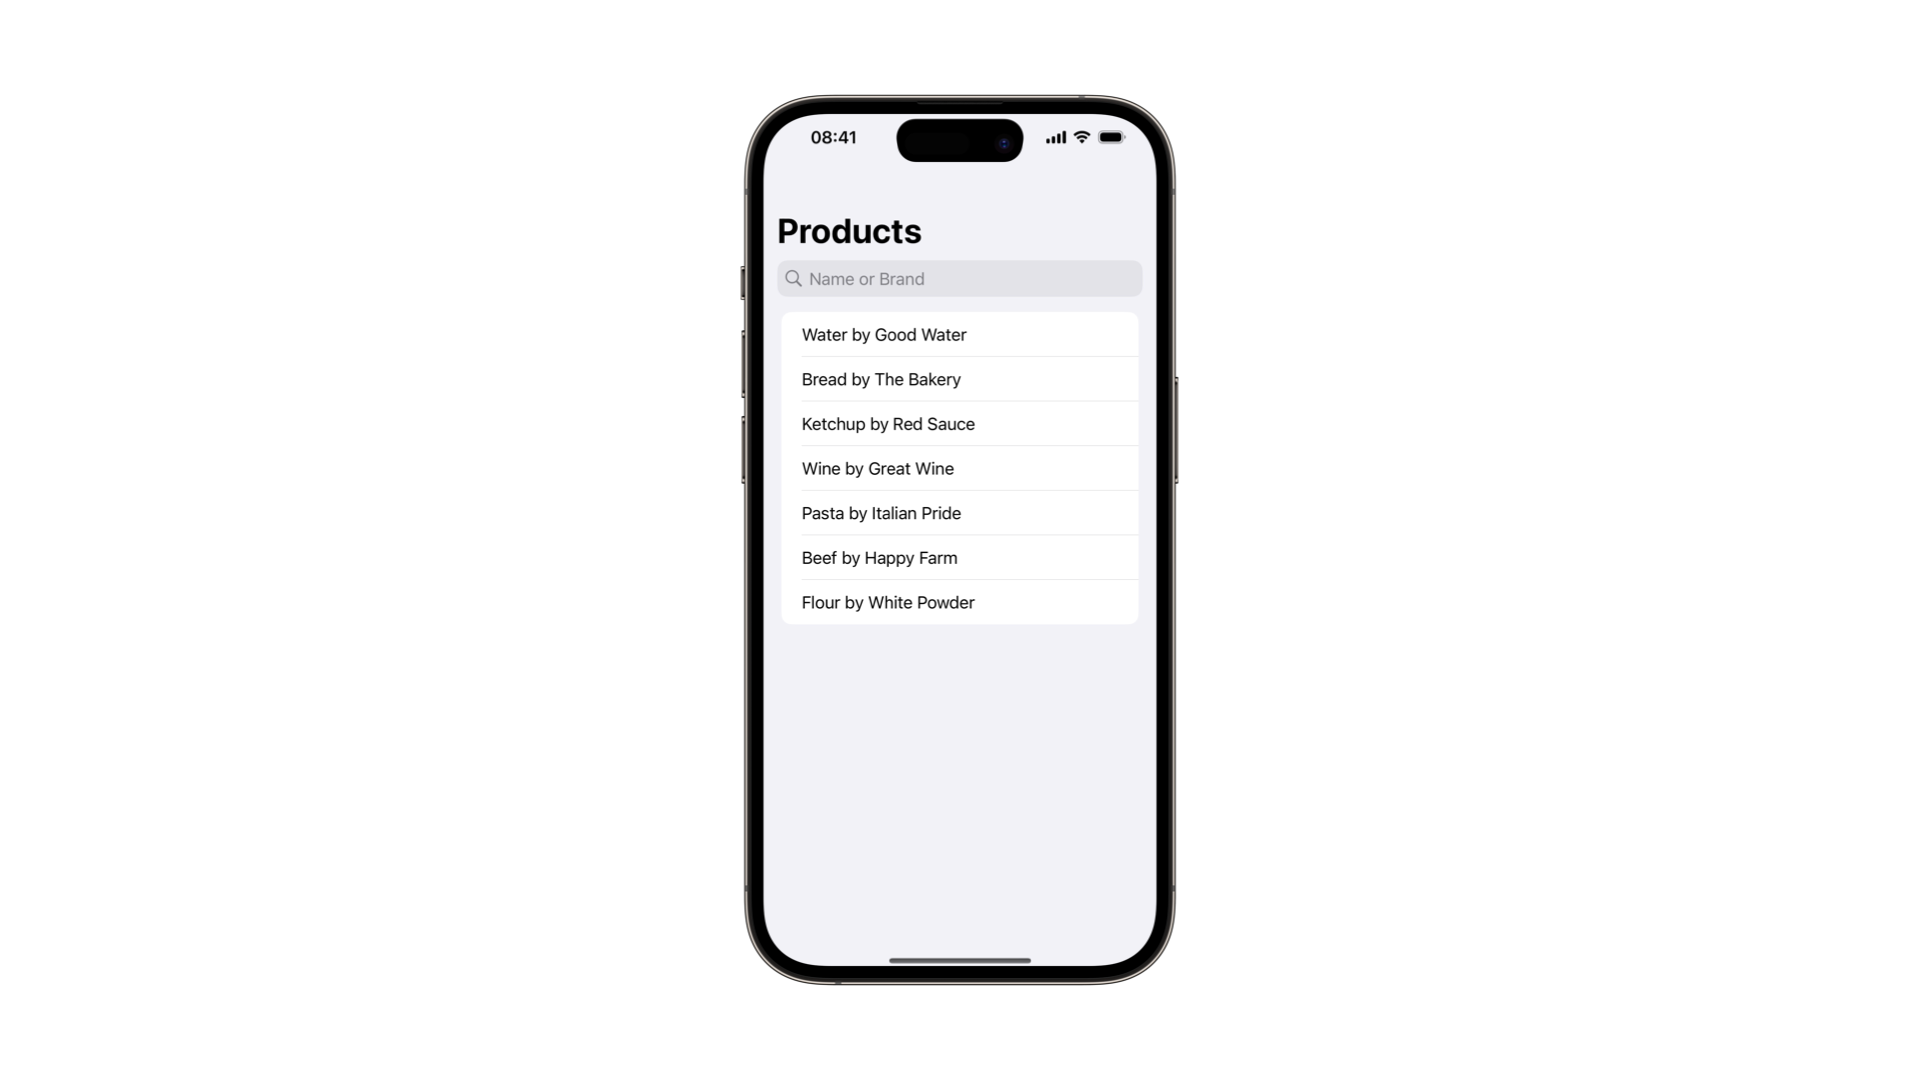 Making your lists searchable in a SwiftUI app